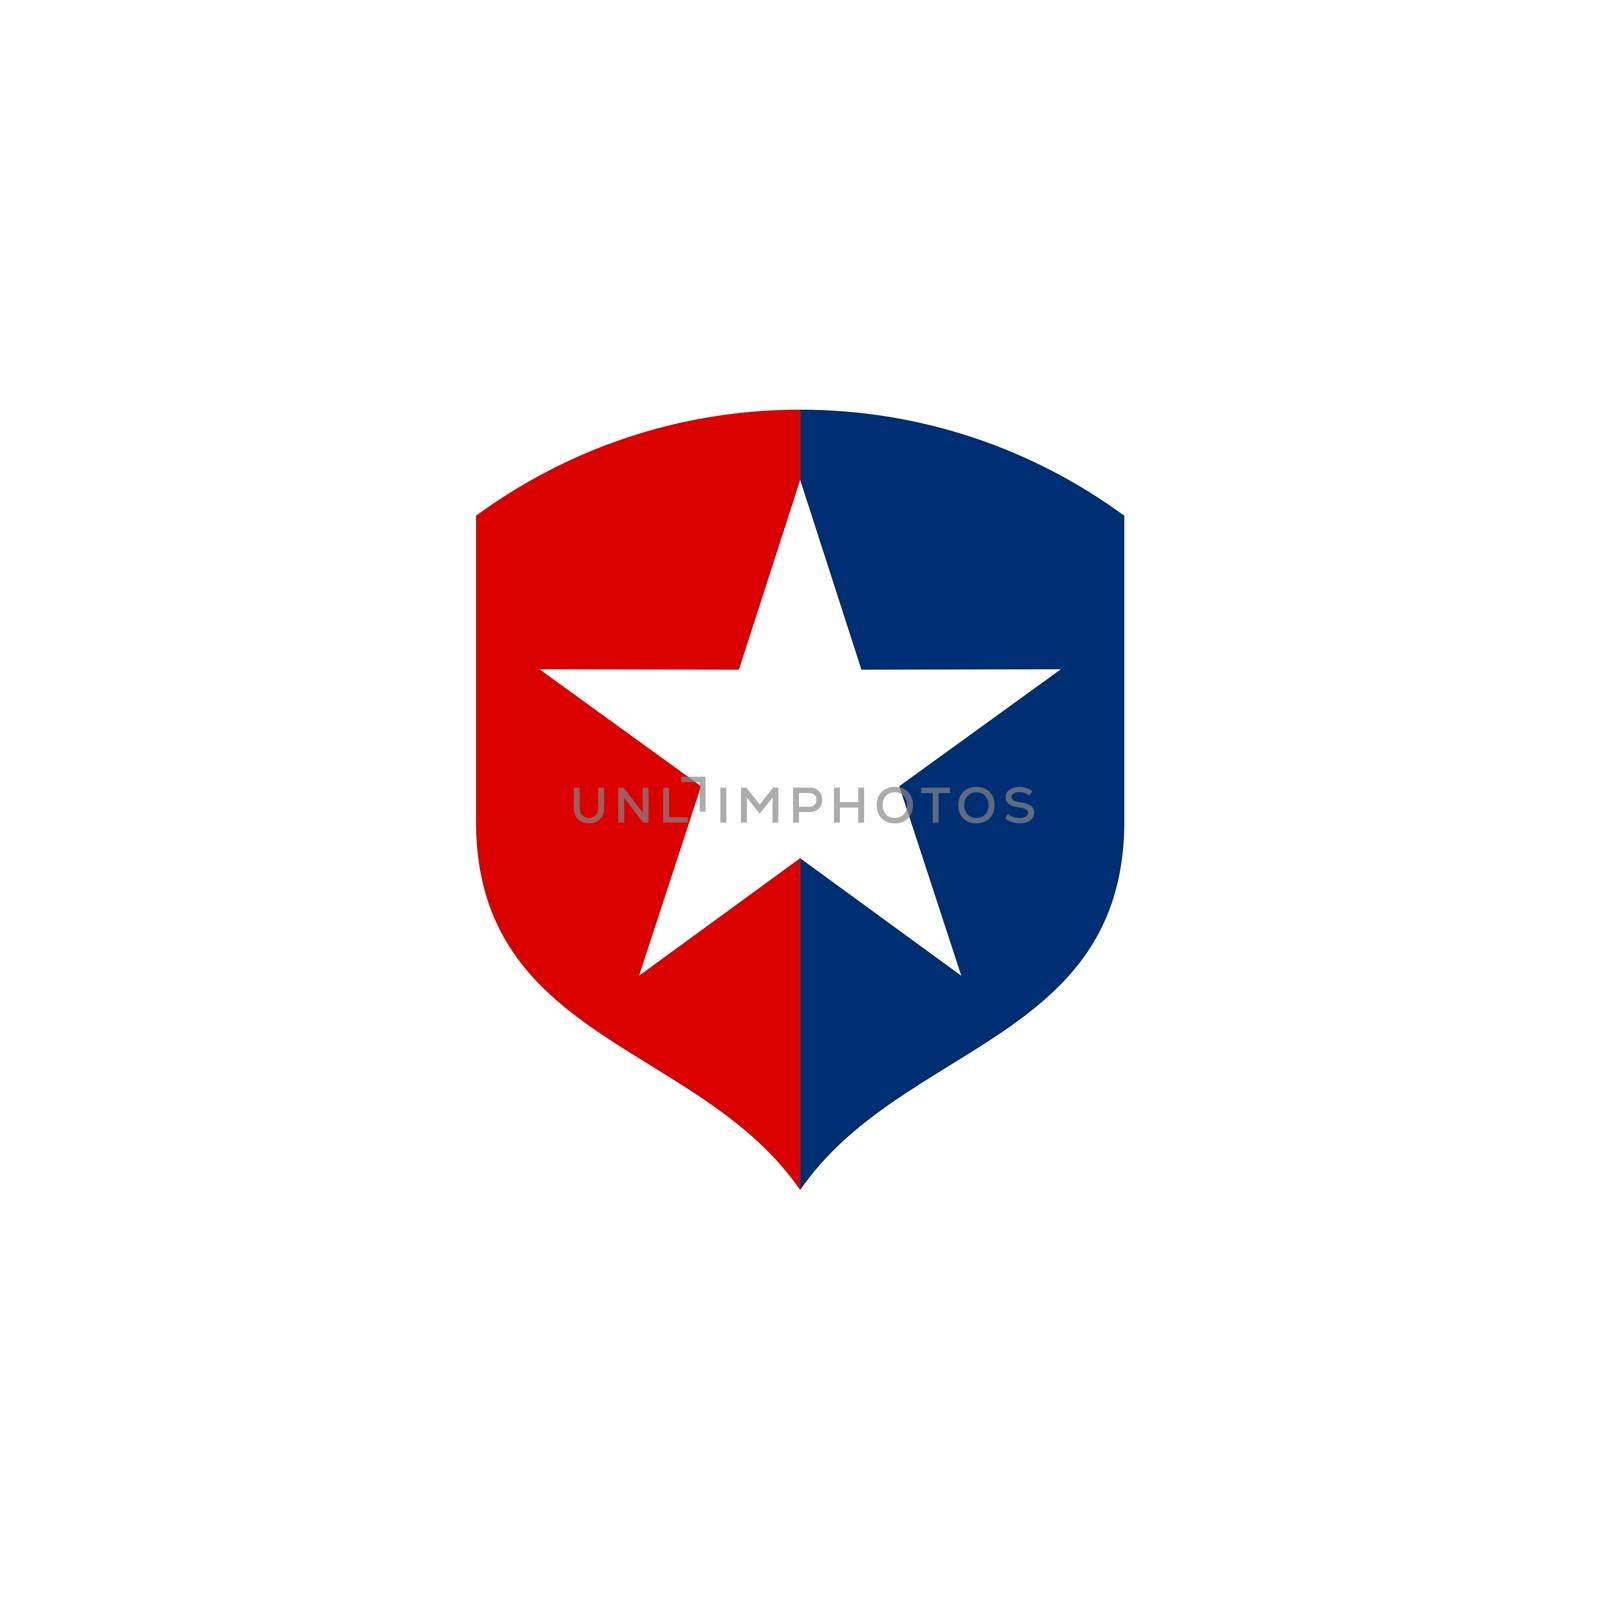 Law Office Star and Shield Logo Template Illustration Design. Vector EPS 10. by soponyono1